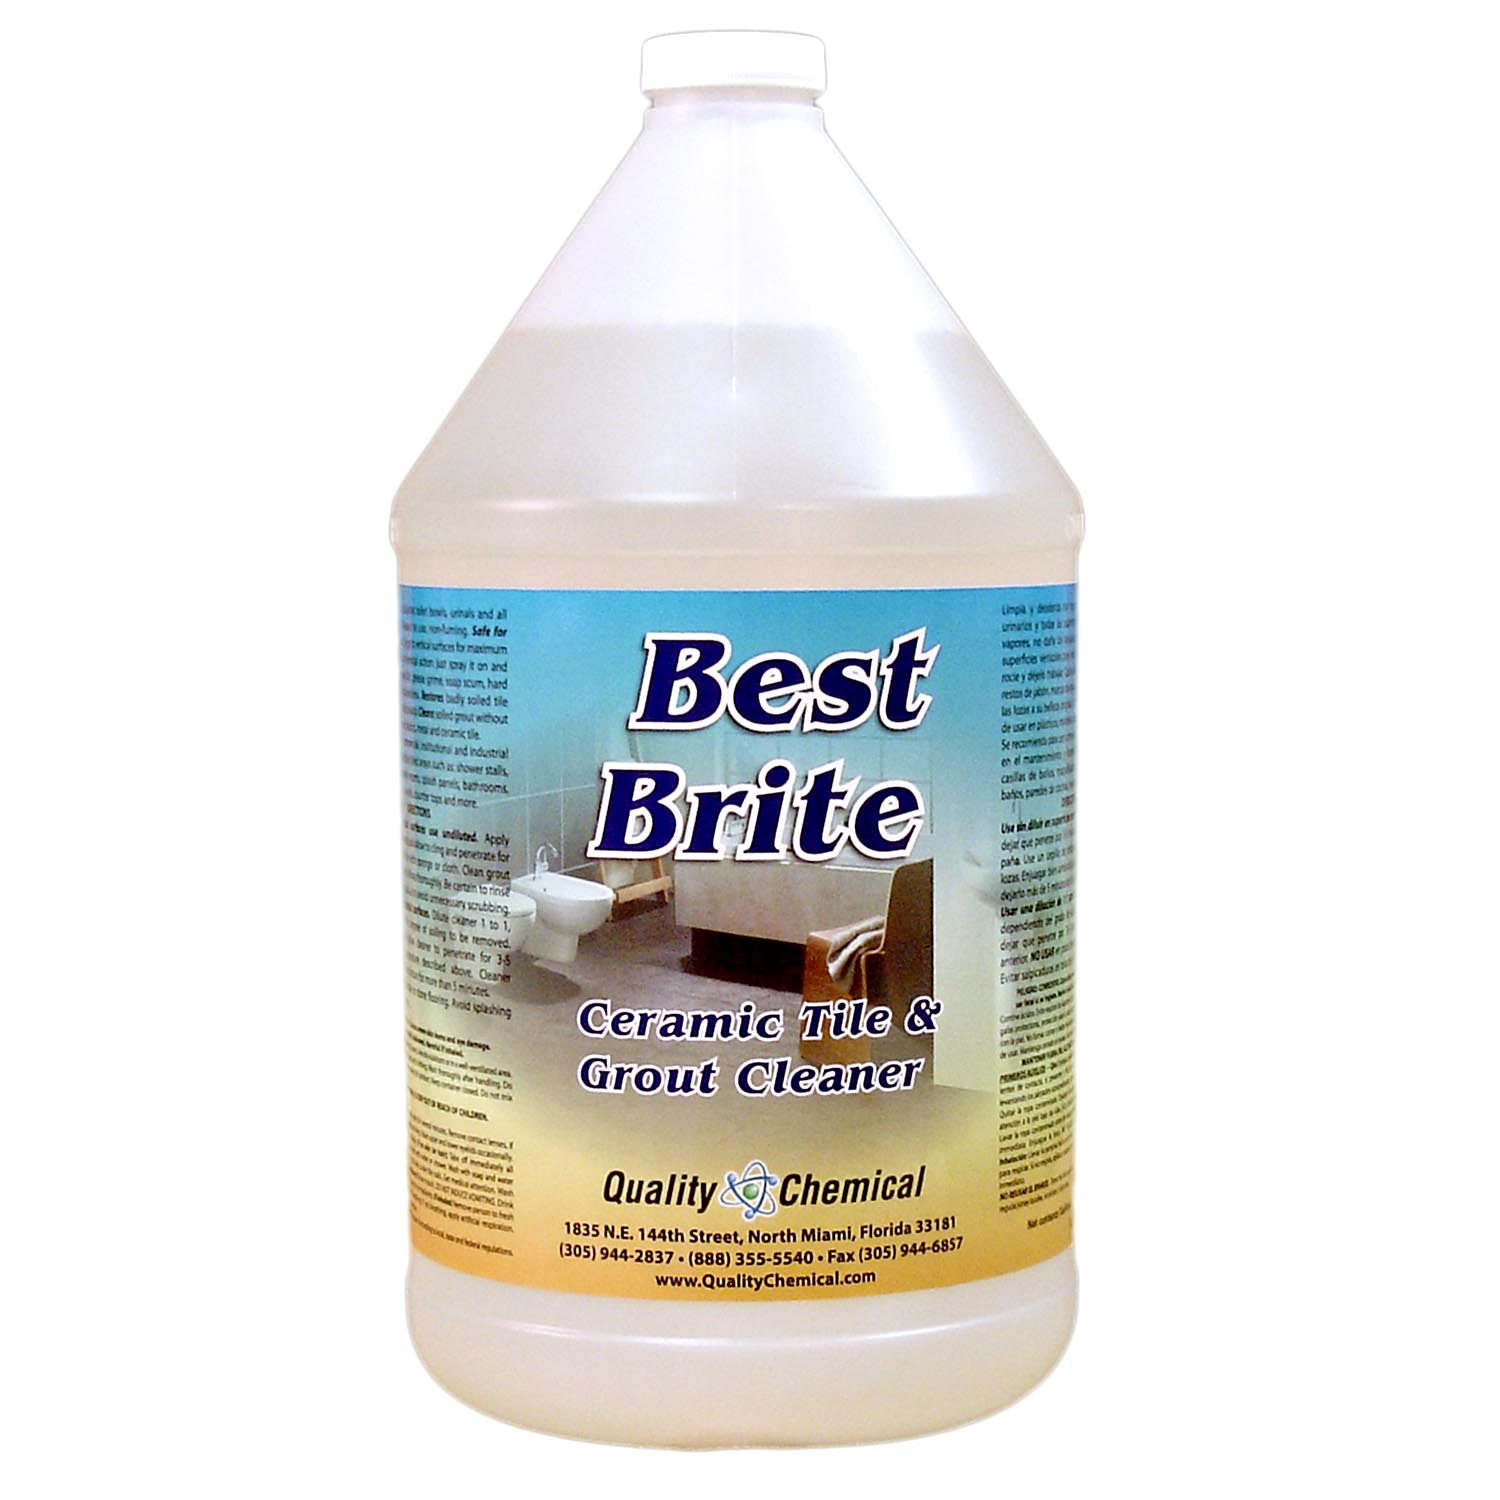 Quality Chemical Company - Best Brite